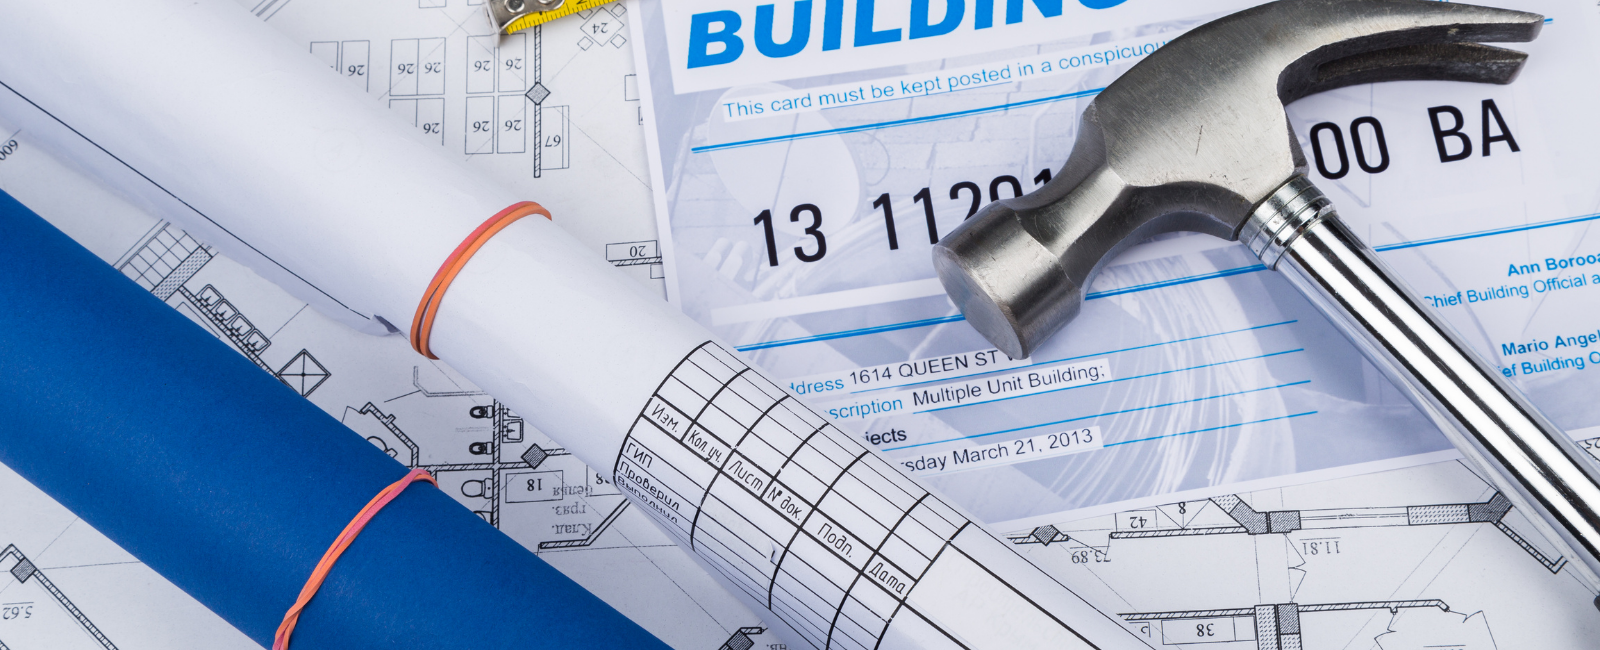 Map, hammer and building permit application form.